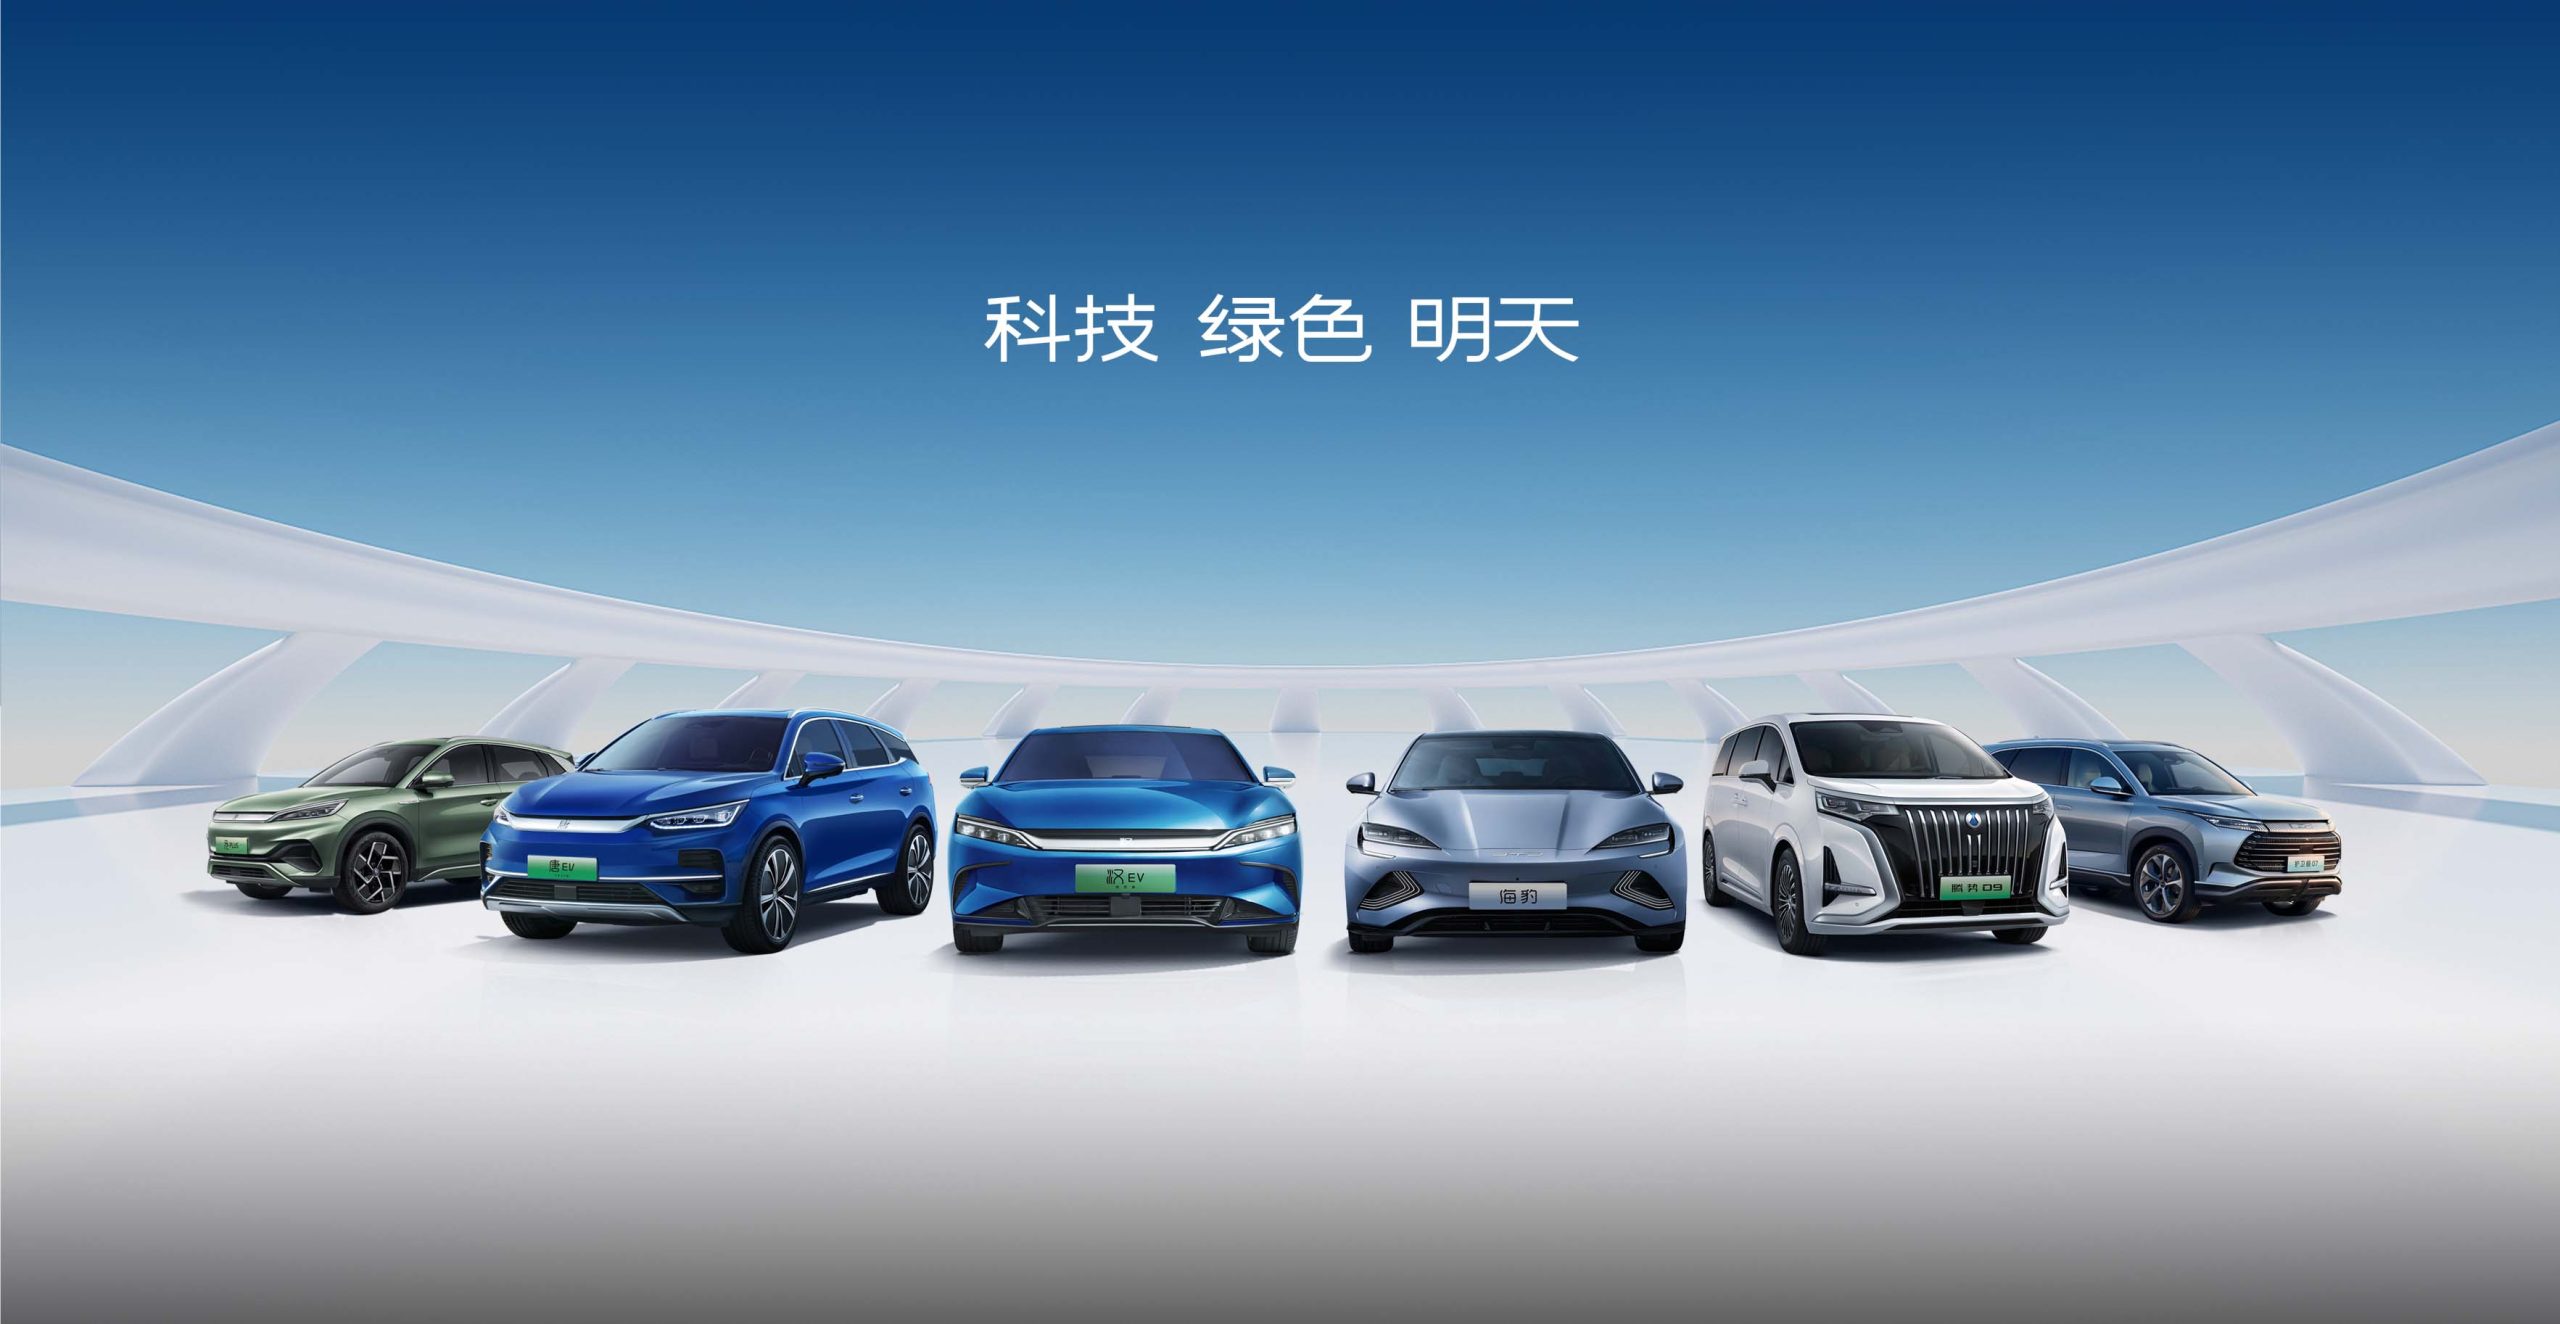 From Batteries to Behemoths: The Rise of BYD in the New Energy Vehicle Market